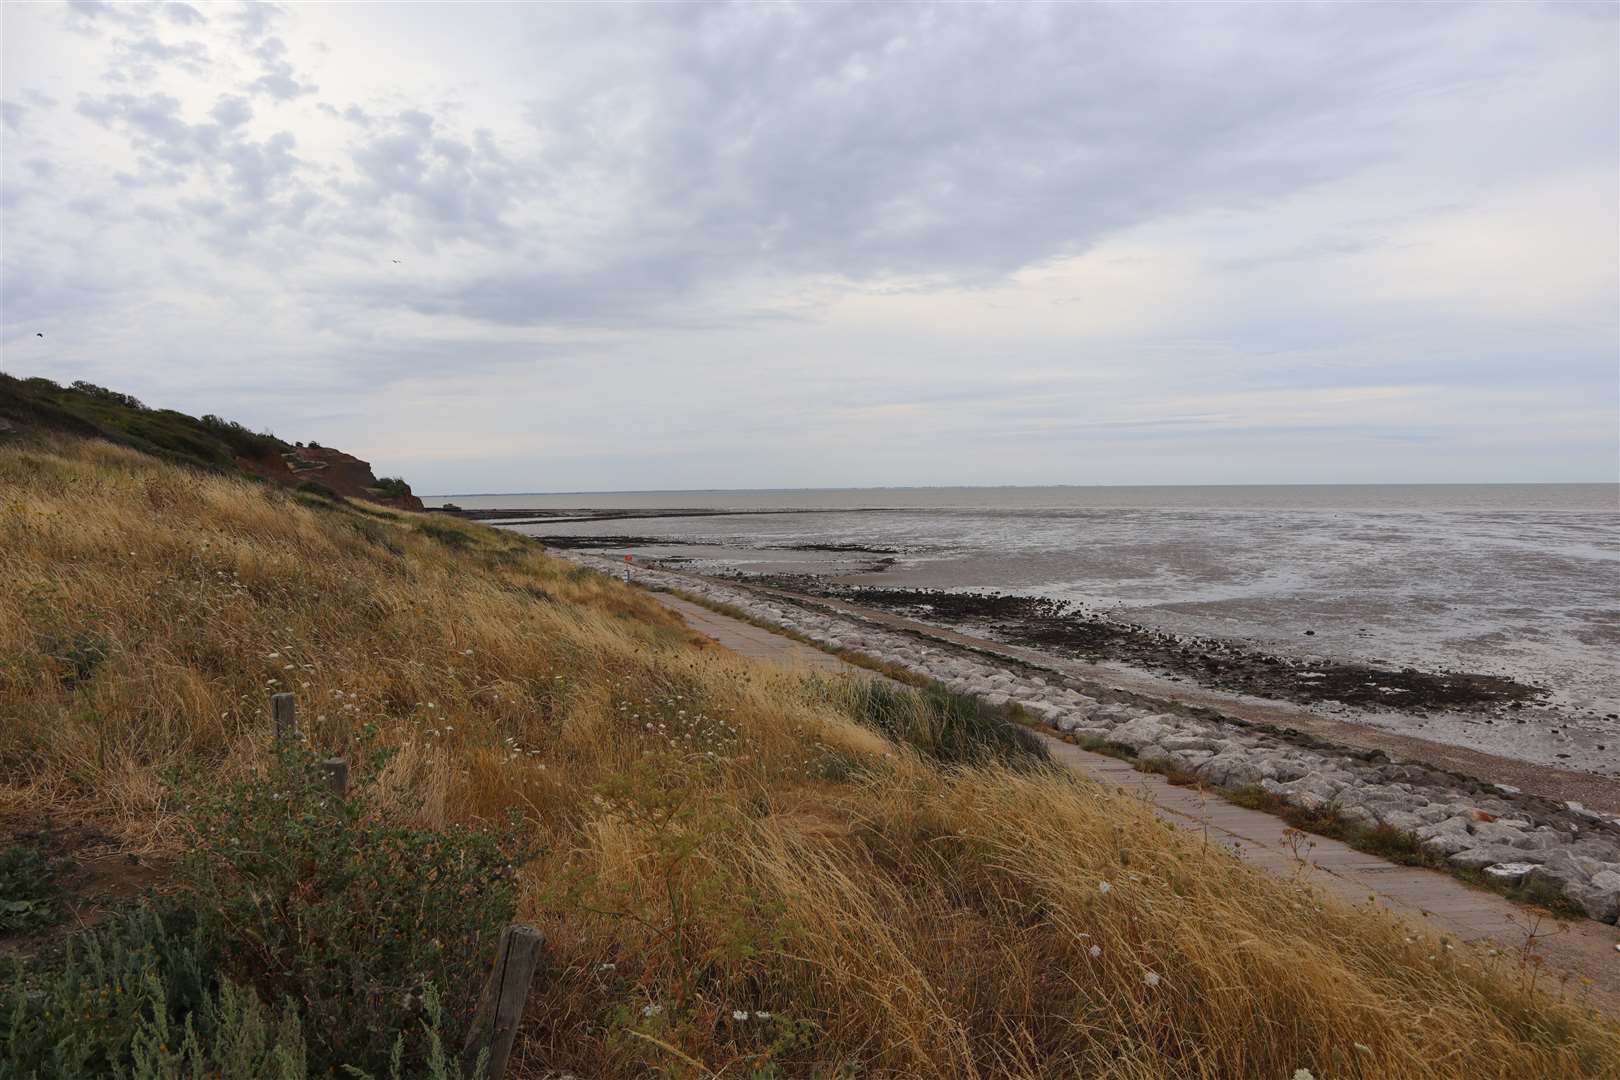 Warden Bay, Sheppey, where the Boy Scouts drowned on August 4, 1912